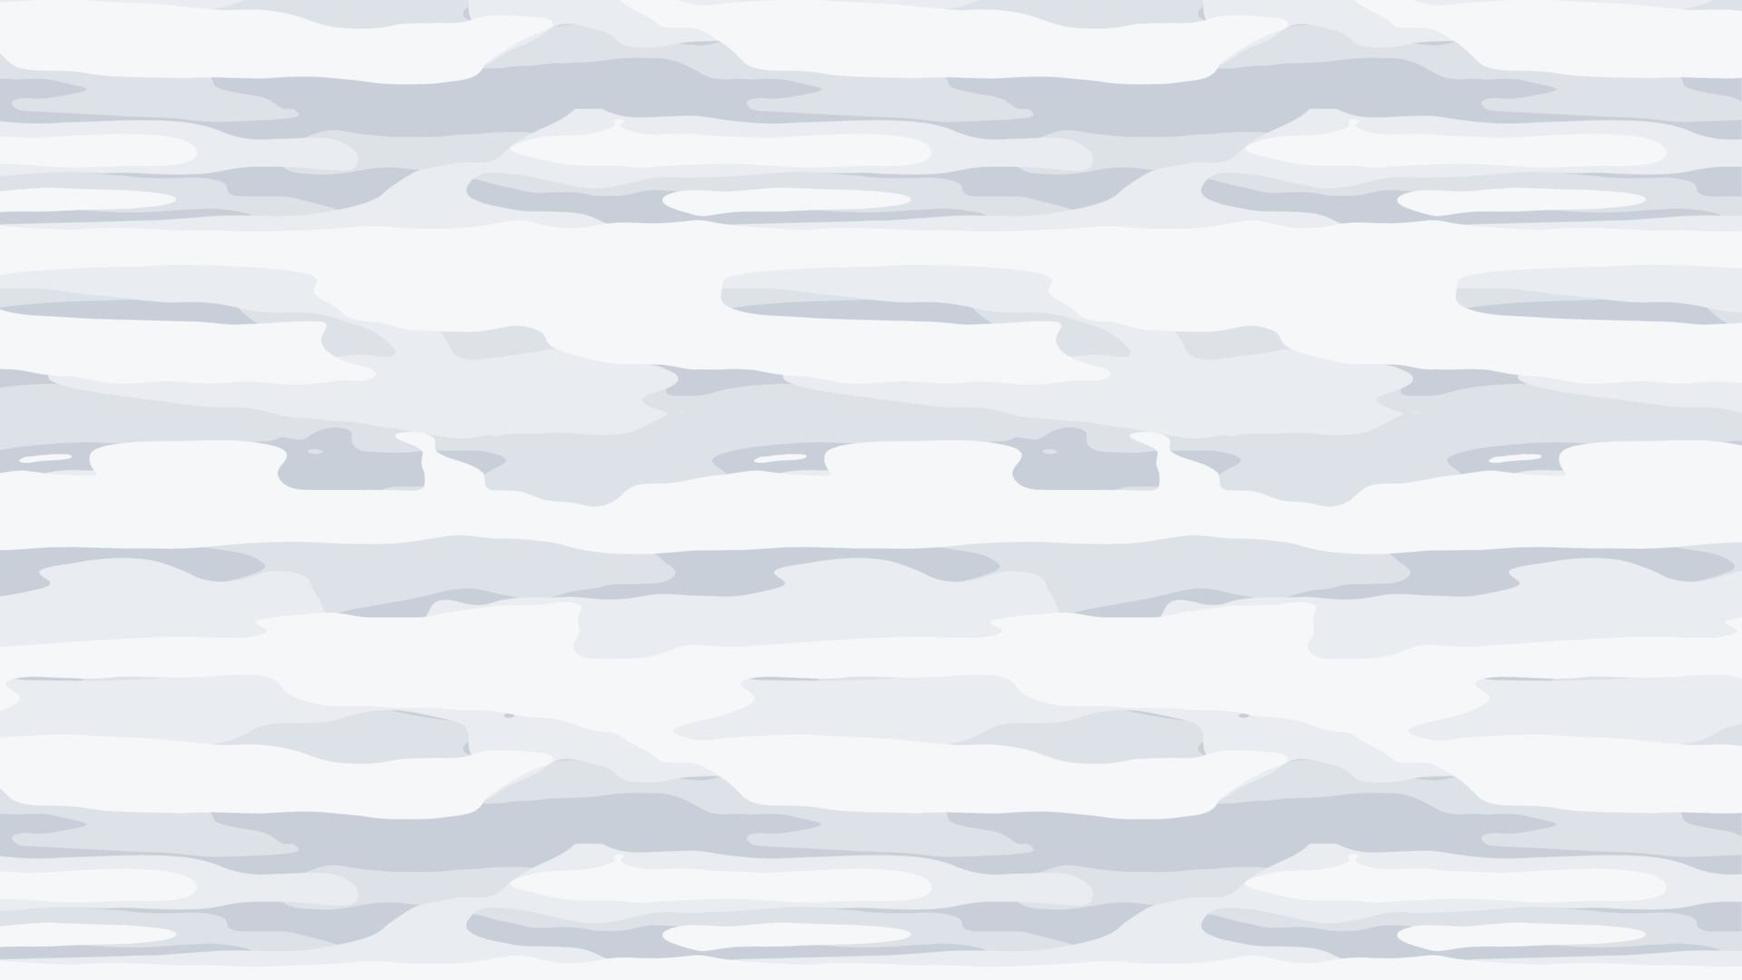 Military and army camouflage pattern background vector